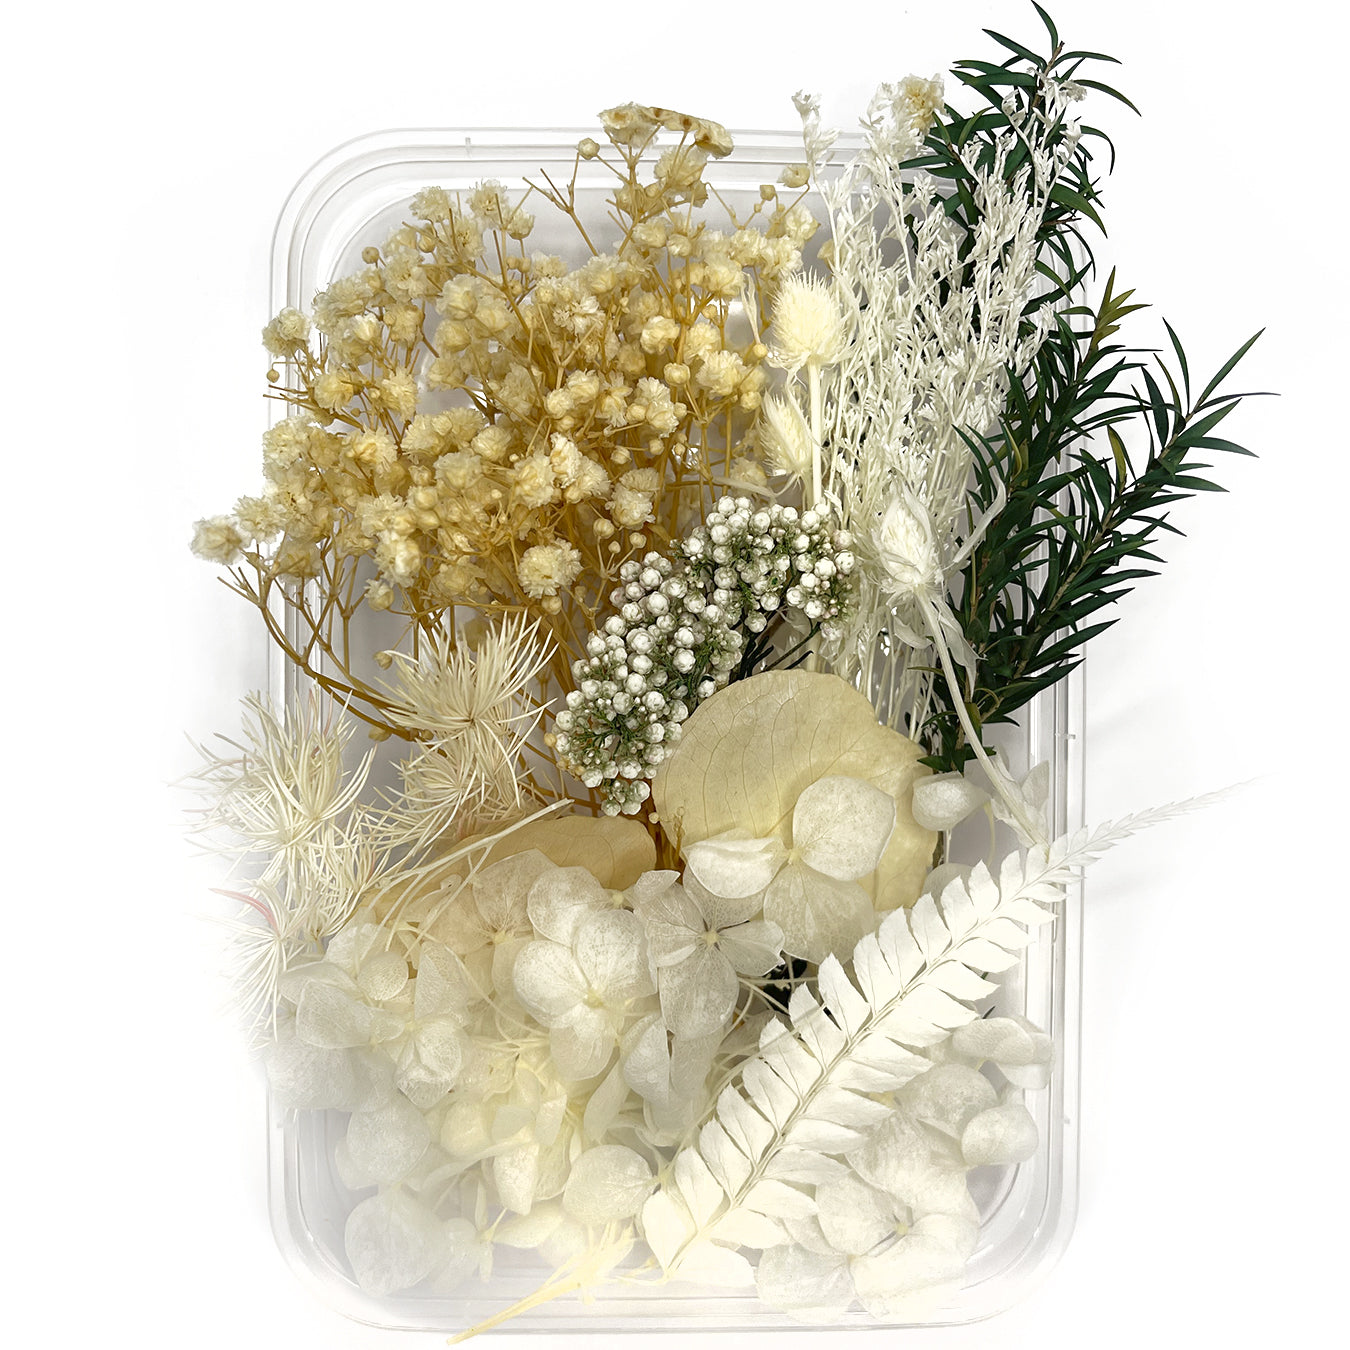 Natural dried flowers set B